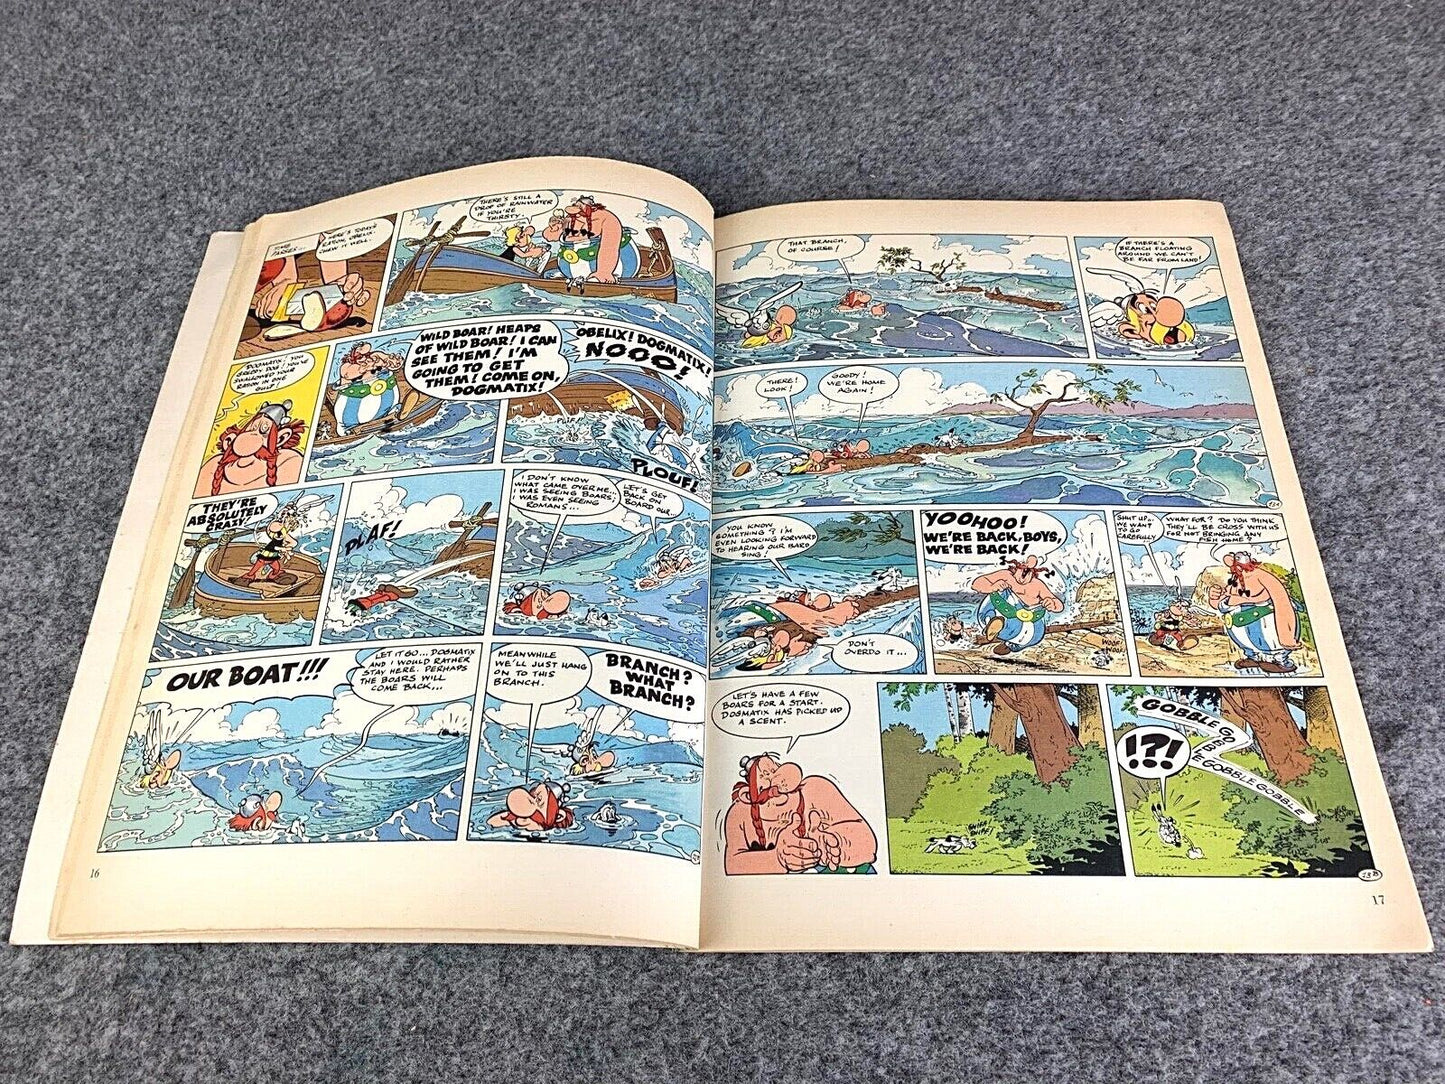 Asterix & the Great Crossing - 1970s Hodder/Dargaud UK Edition Paperback Book Uderzo